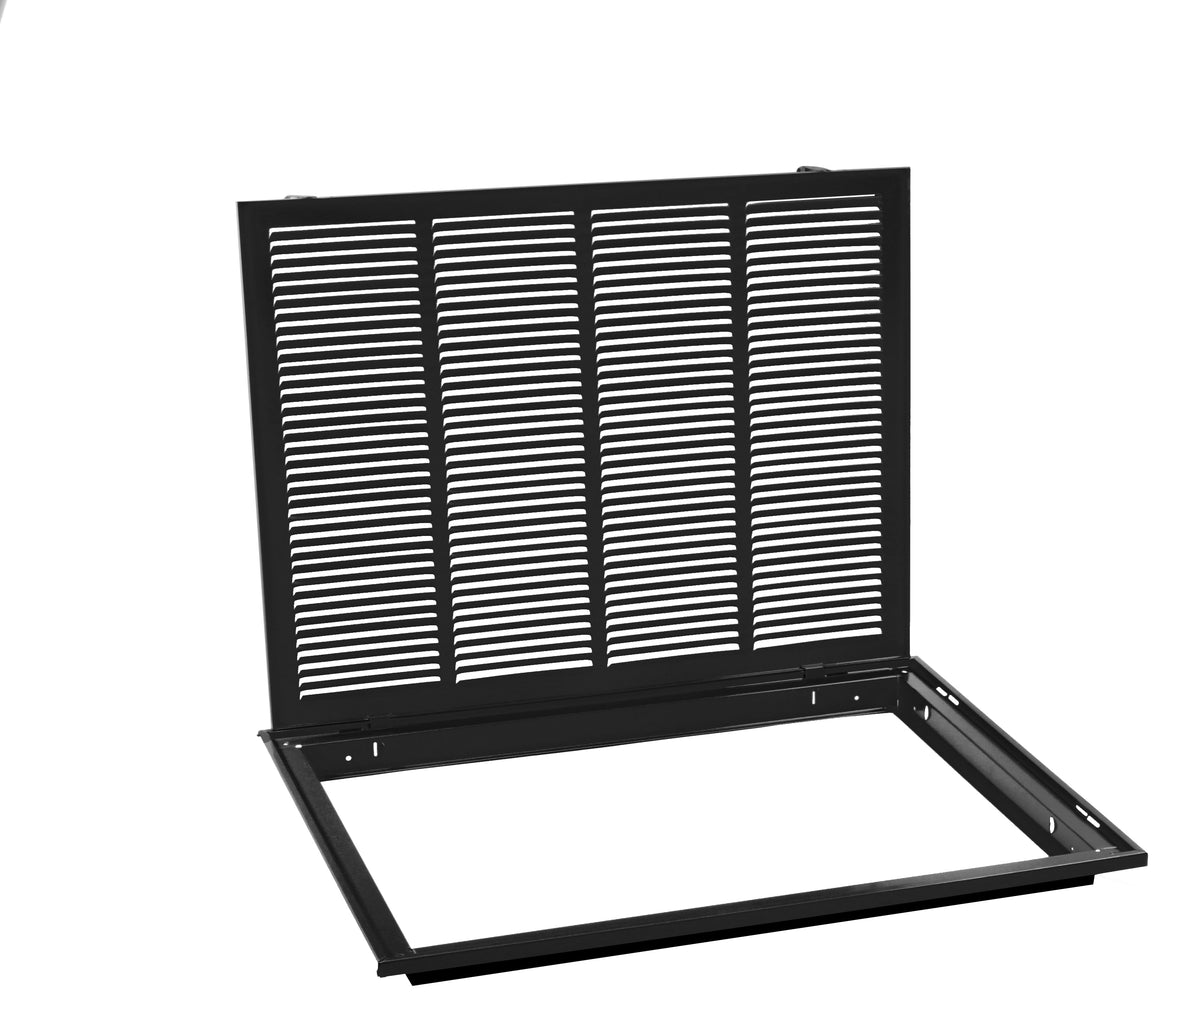 25&quot; X 16&quot; Steel Return Air Filter Grille for 1&quot; Filter - Removable Frame - Black - [Outer Dimensions: 27 5/8&quot; X 18 5/8&quot;]